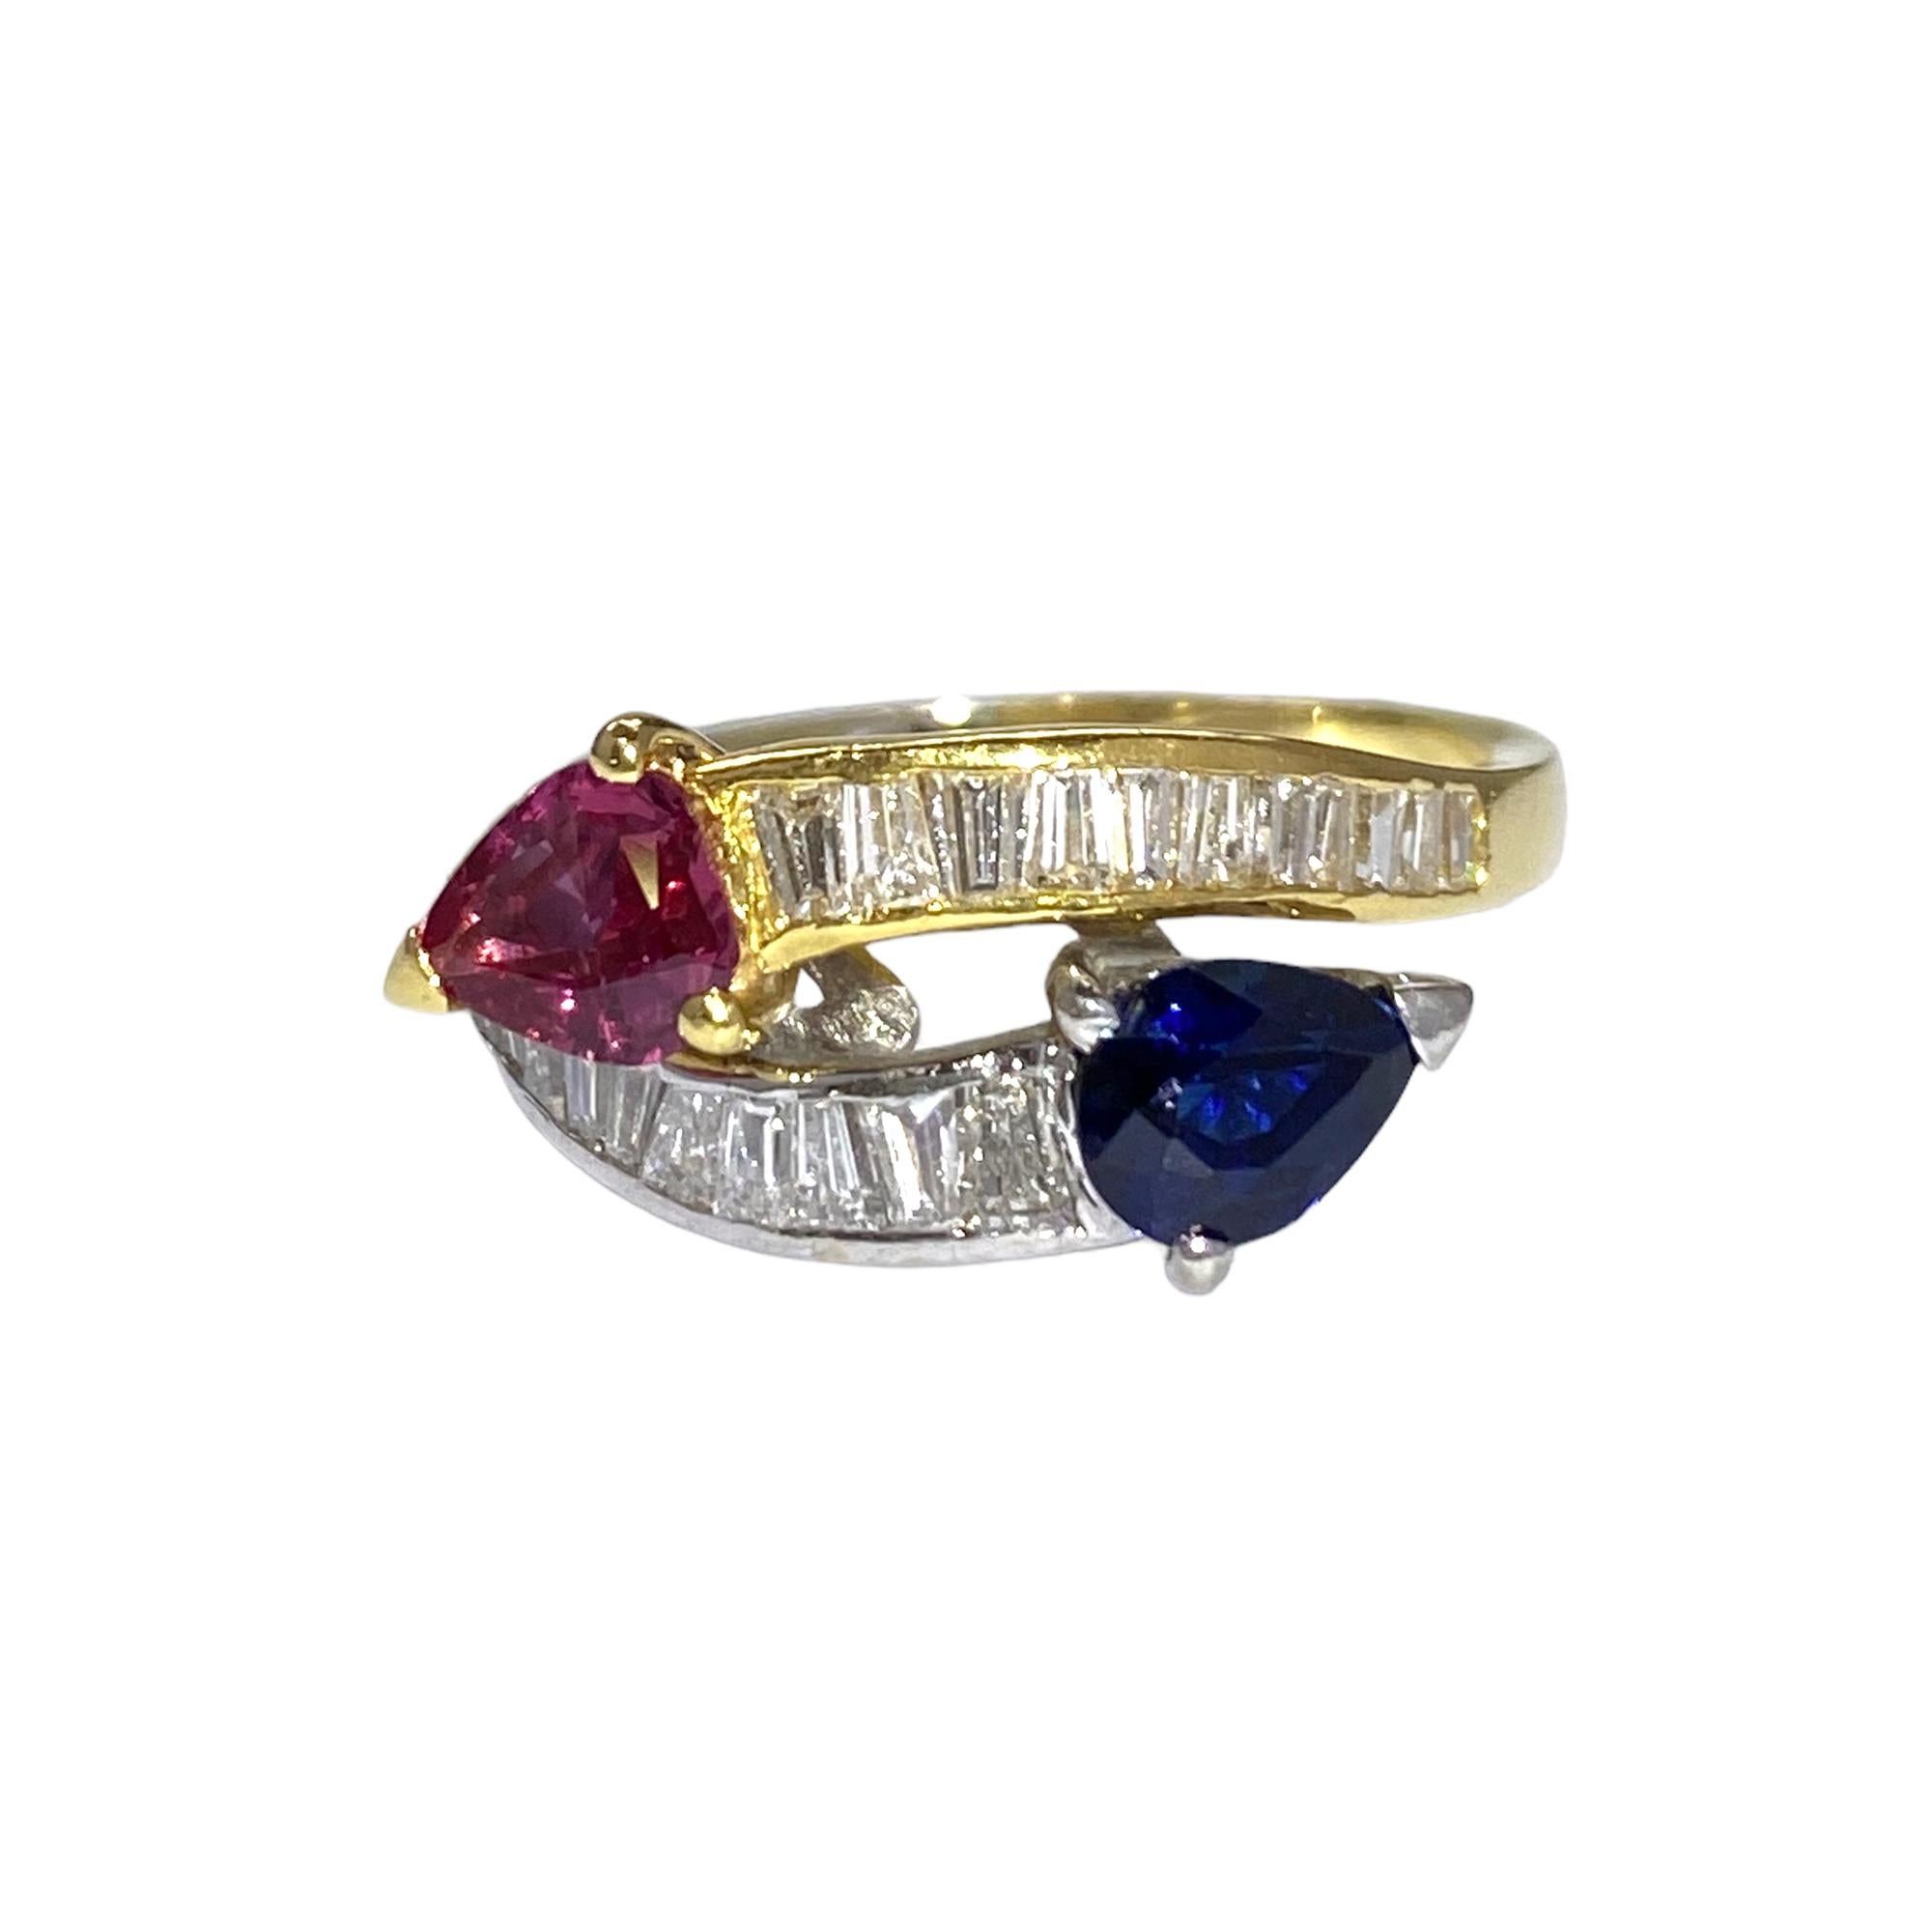 Very Good condition - quality grade of setting and polishing is very good
Total weight: 4,95 grams
Diamonds : 0,80 carats white natural diamonds, baguette cut
Natural Ruby : 0,90 ct - Pear Shape 
Natural Sapphire : 0,90 ct - Pear Shape 
Made in